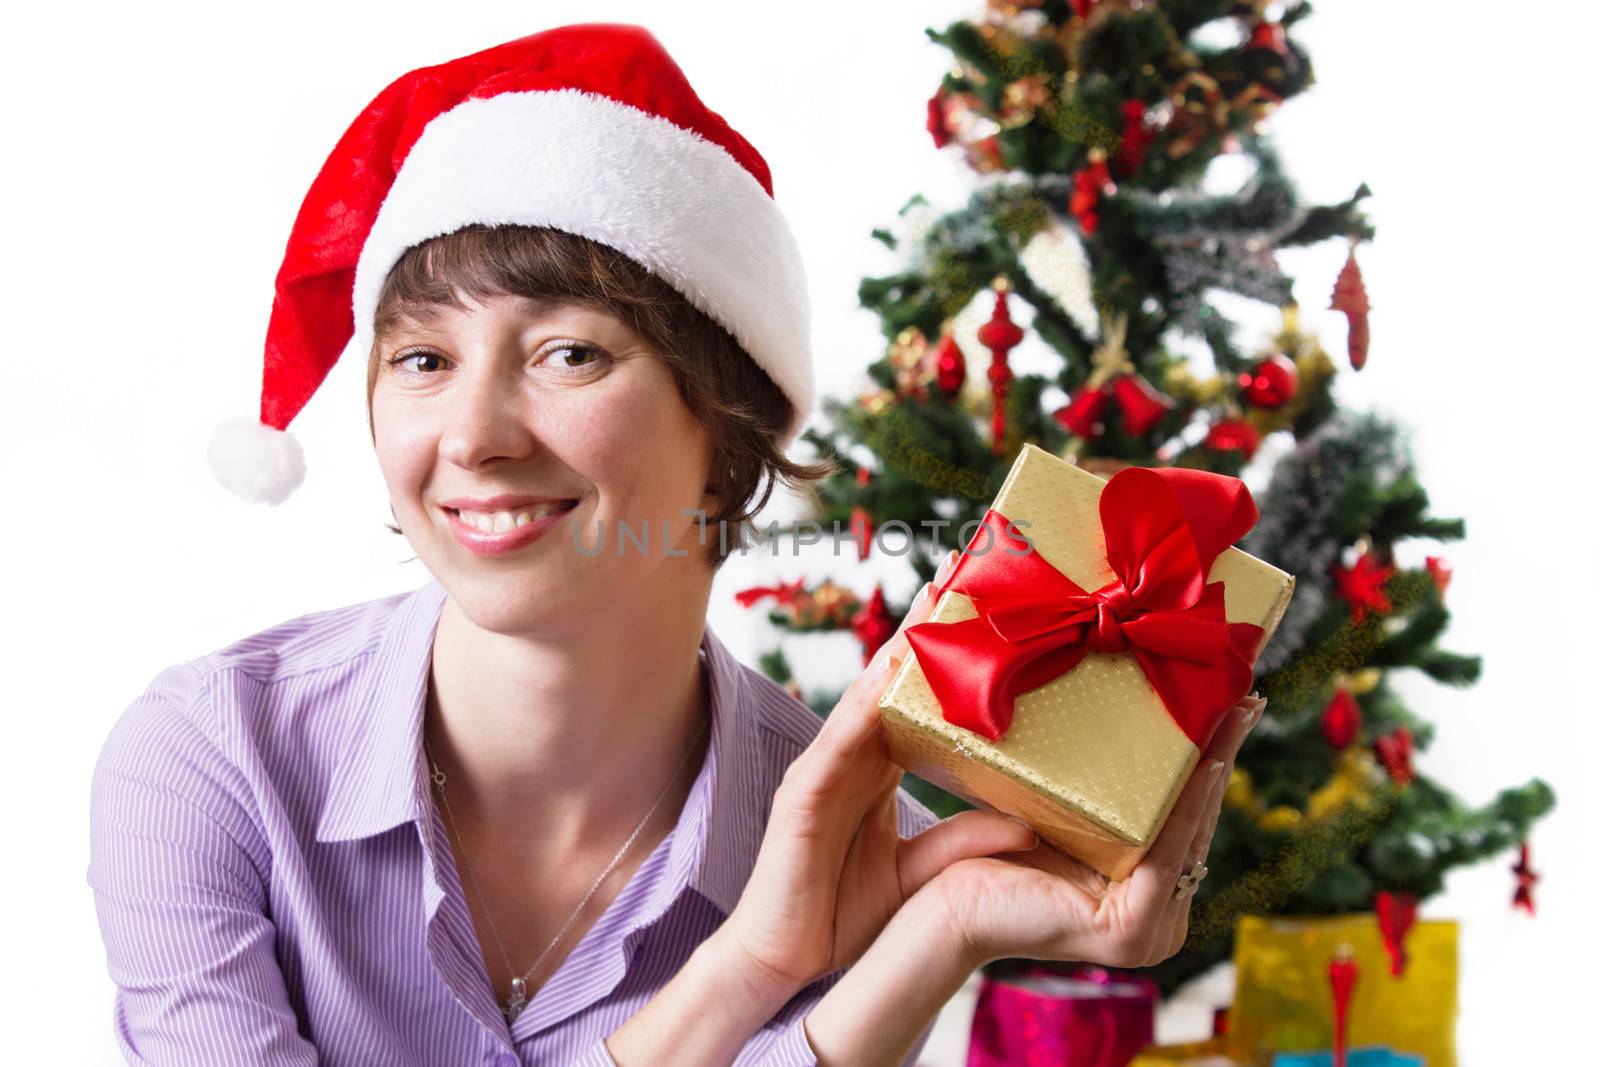 Woman in Santa hat with present under Cristmas tree by Angel_a